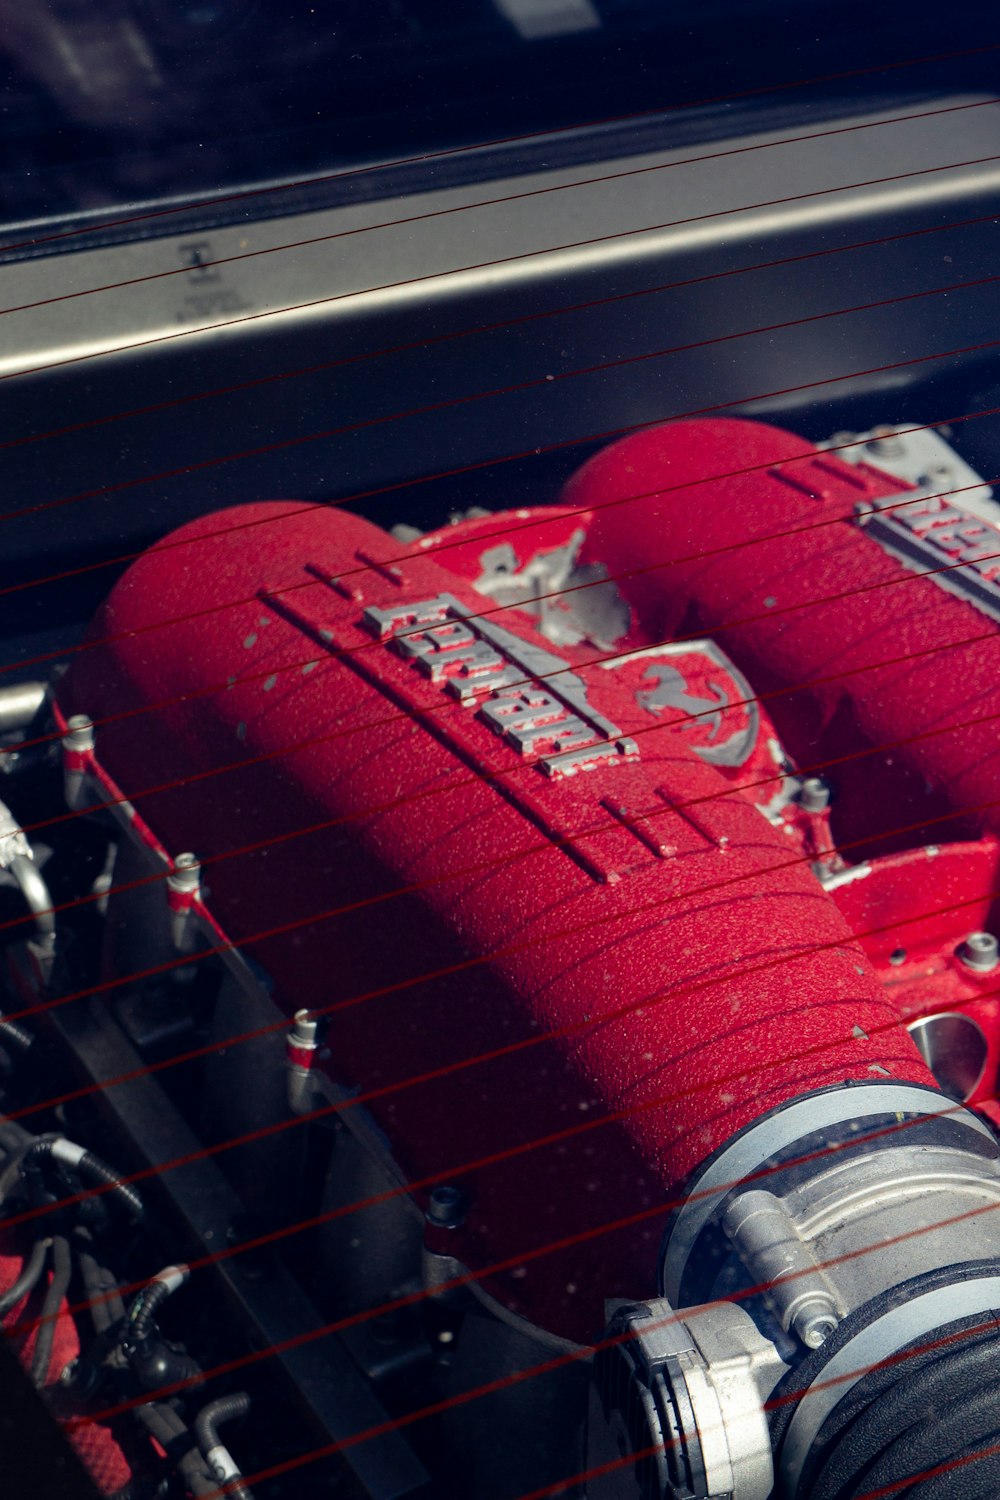 a close-up of a red car engine